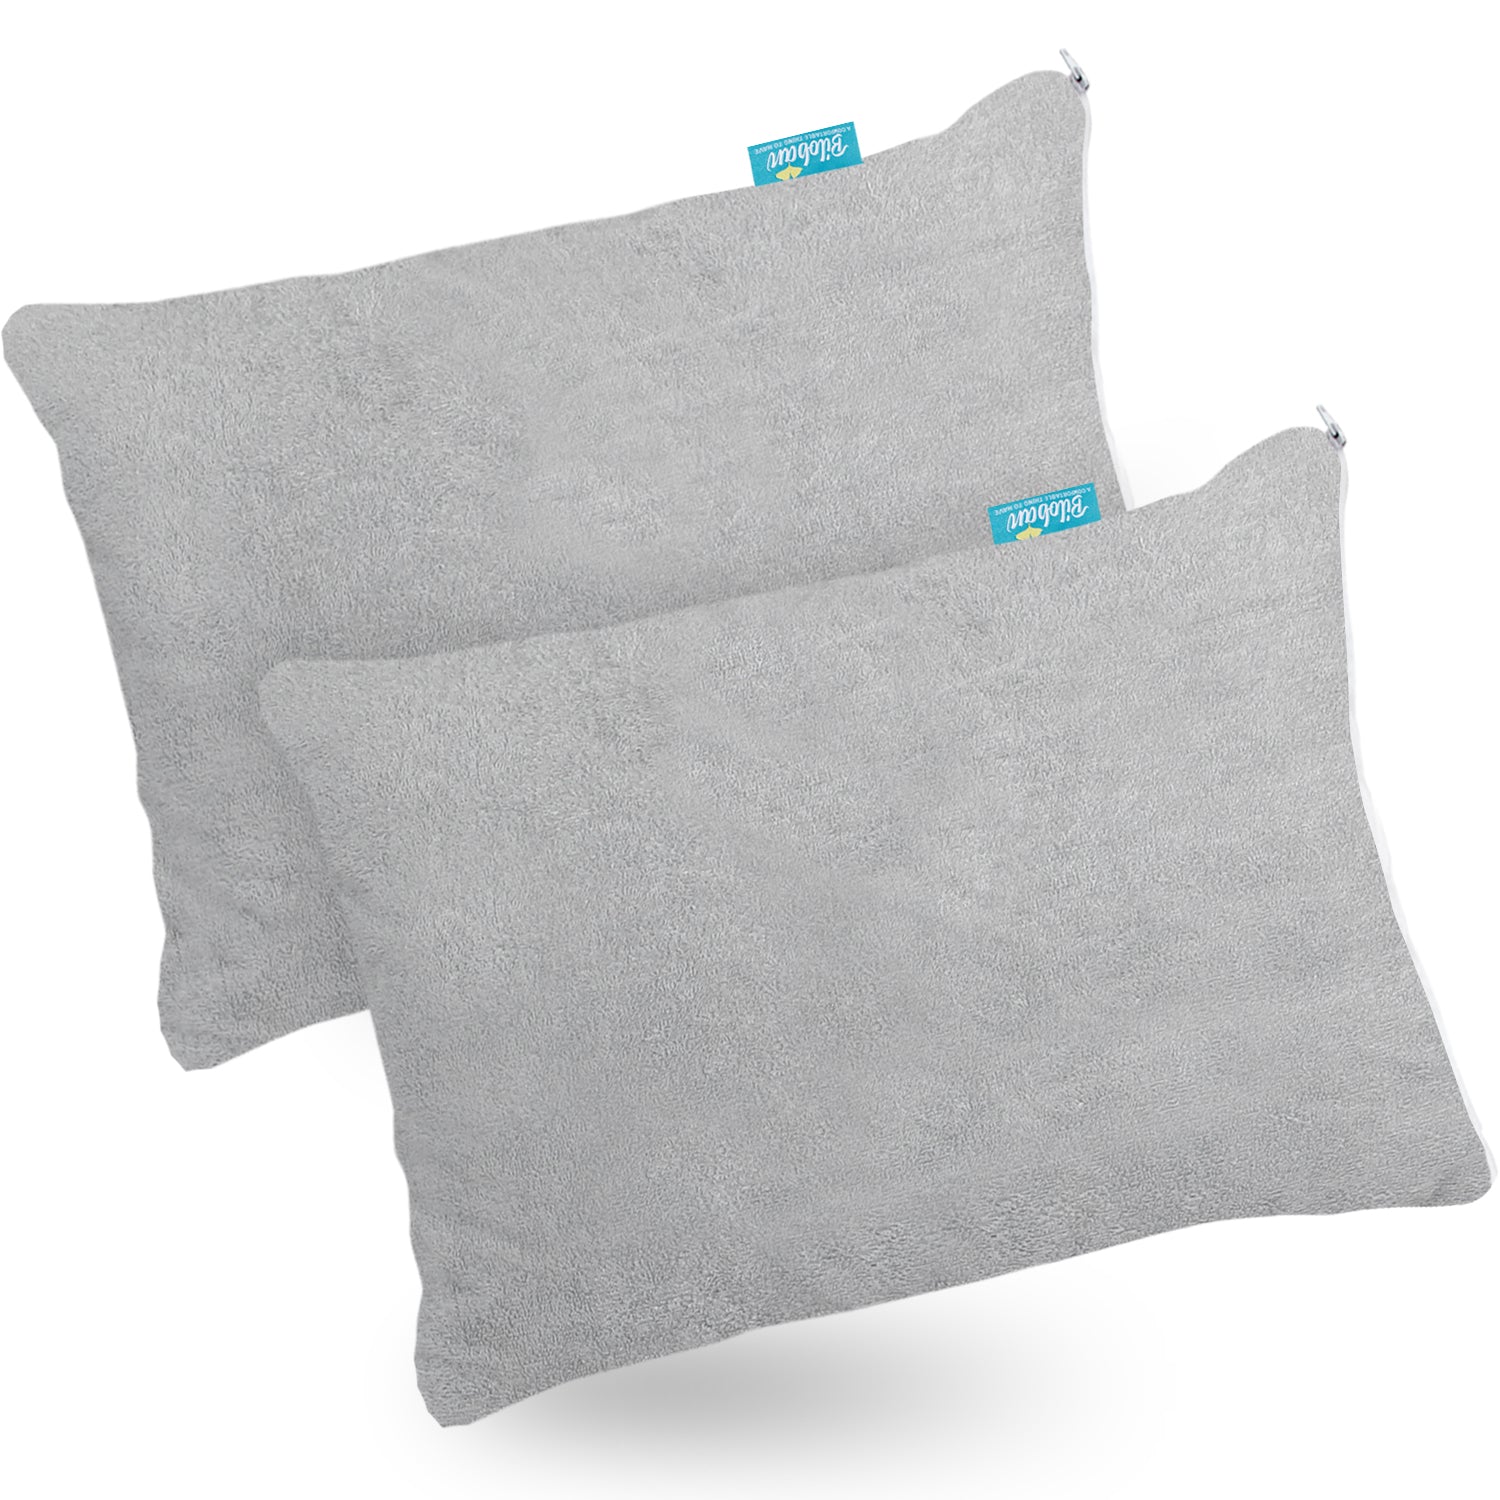 Waterproof Toddler Pillowcase with Zipper - 2 Pack, Bamboo Terry Surface, Fits Toddler Pillow 12"x16", 13"x18" or 14"x19", Grey - Biloban Online Store